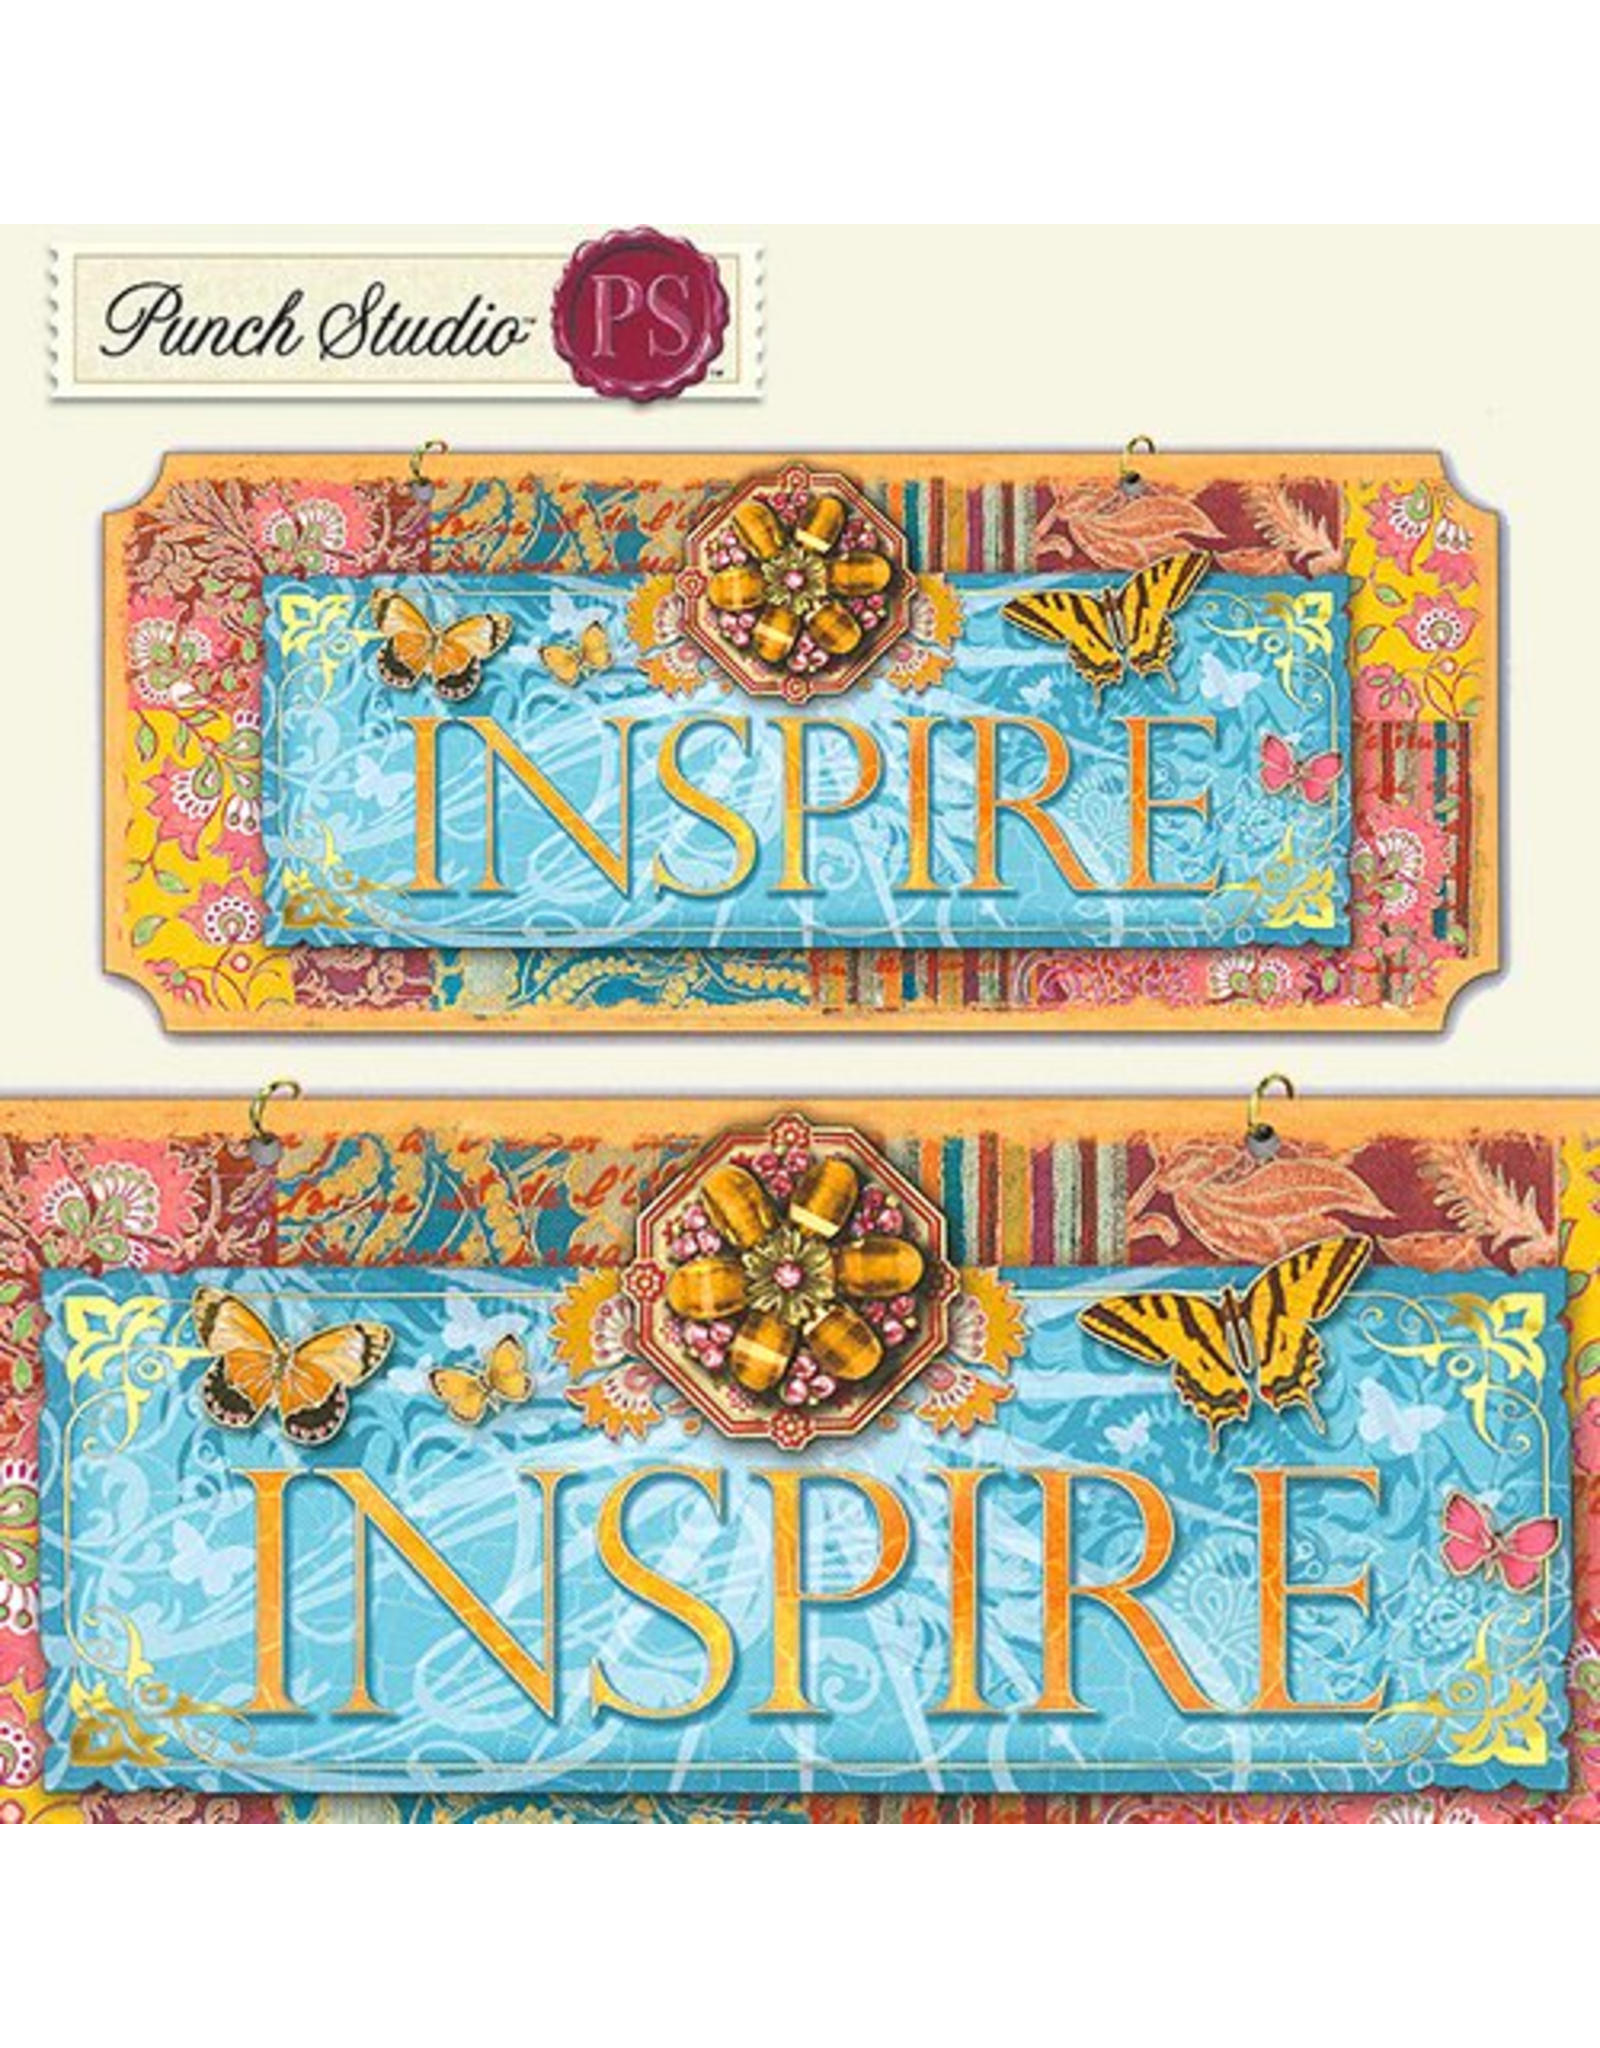 Punch Studio Inspirational Wall Plaque with INSPIRE